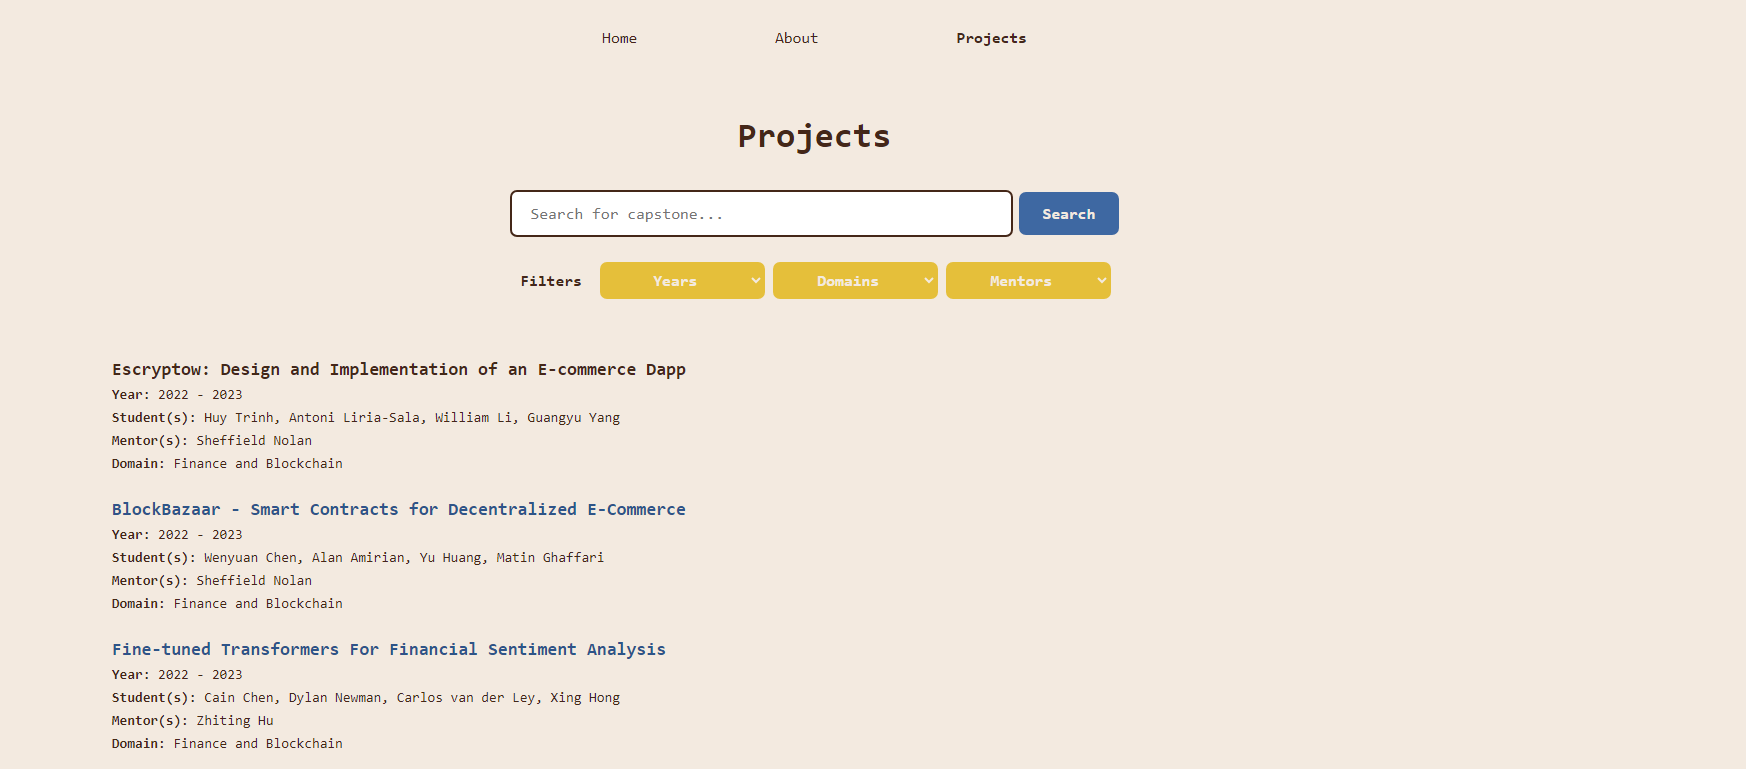 Capstonian Project Page